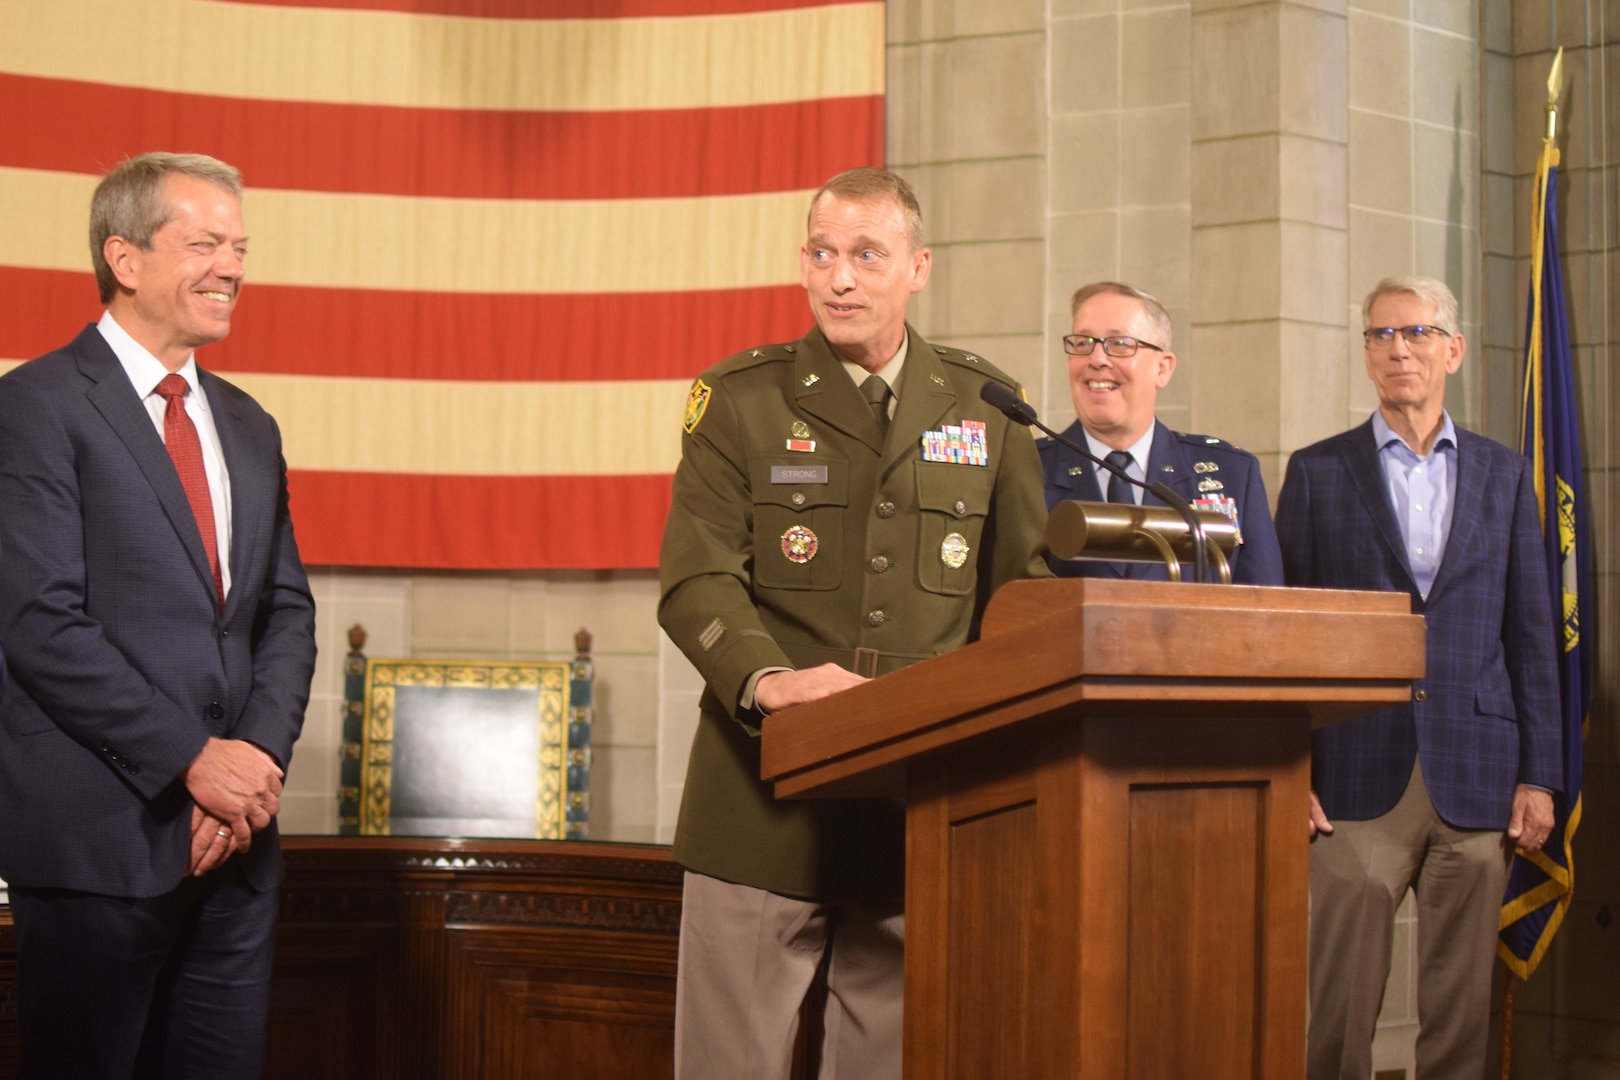 Nebraska Governor Jim Pillen announced his decision May 26, 2023, to appoint Brig. Gen. Craig Strong to become the 34th Adjutant General of the Nebraska Military Department, which includes the Air National Guard, Army National Guard, and Nebraska Emergency Management Agency.